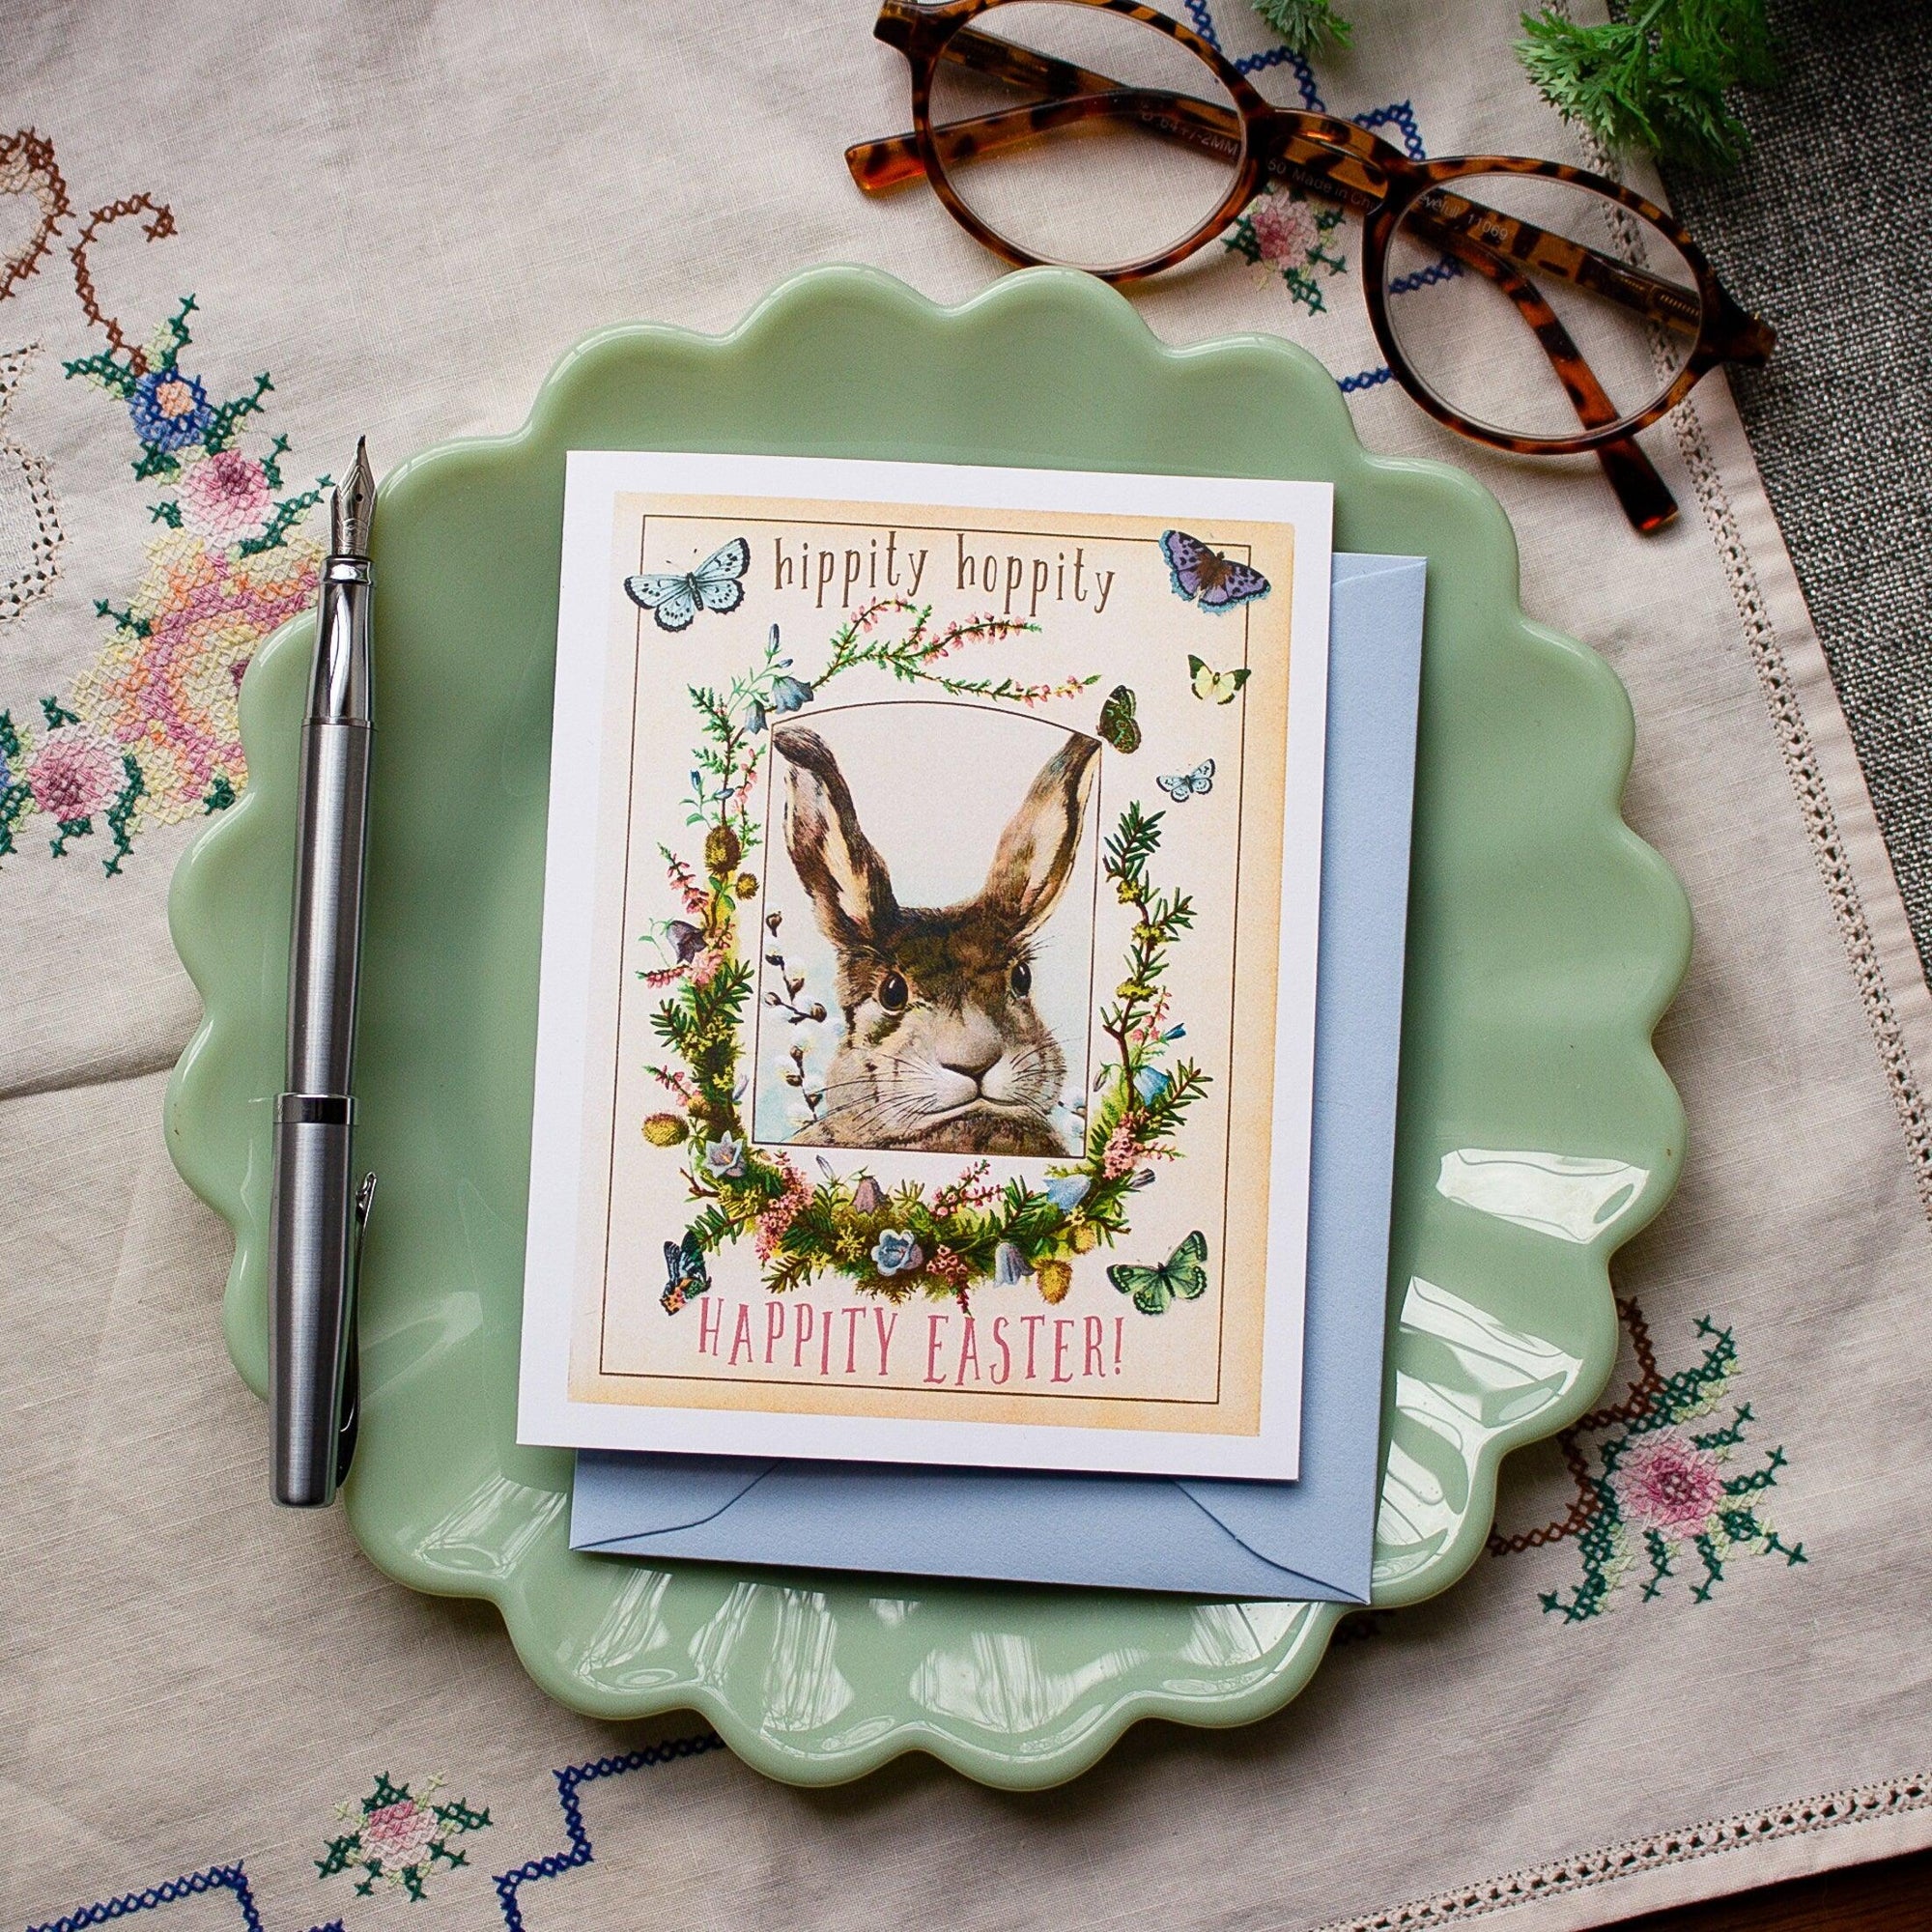 Cute Easter Bunny Card - Hippity Hoppity Happy Easter Card - Vintage Rabbit Card for Easter Baskets